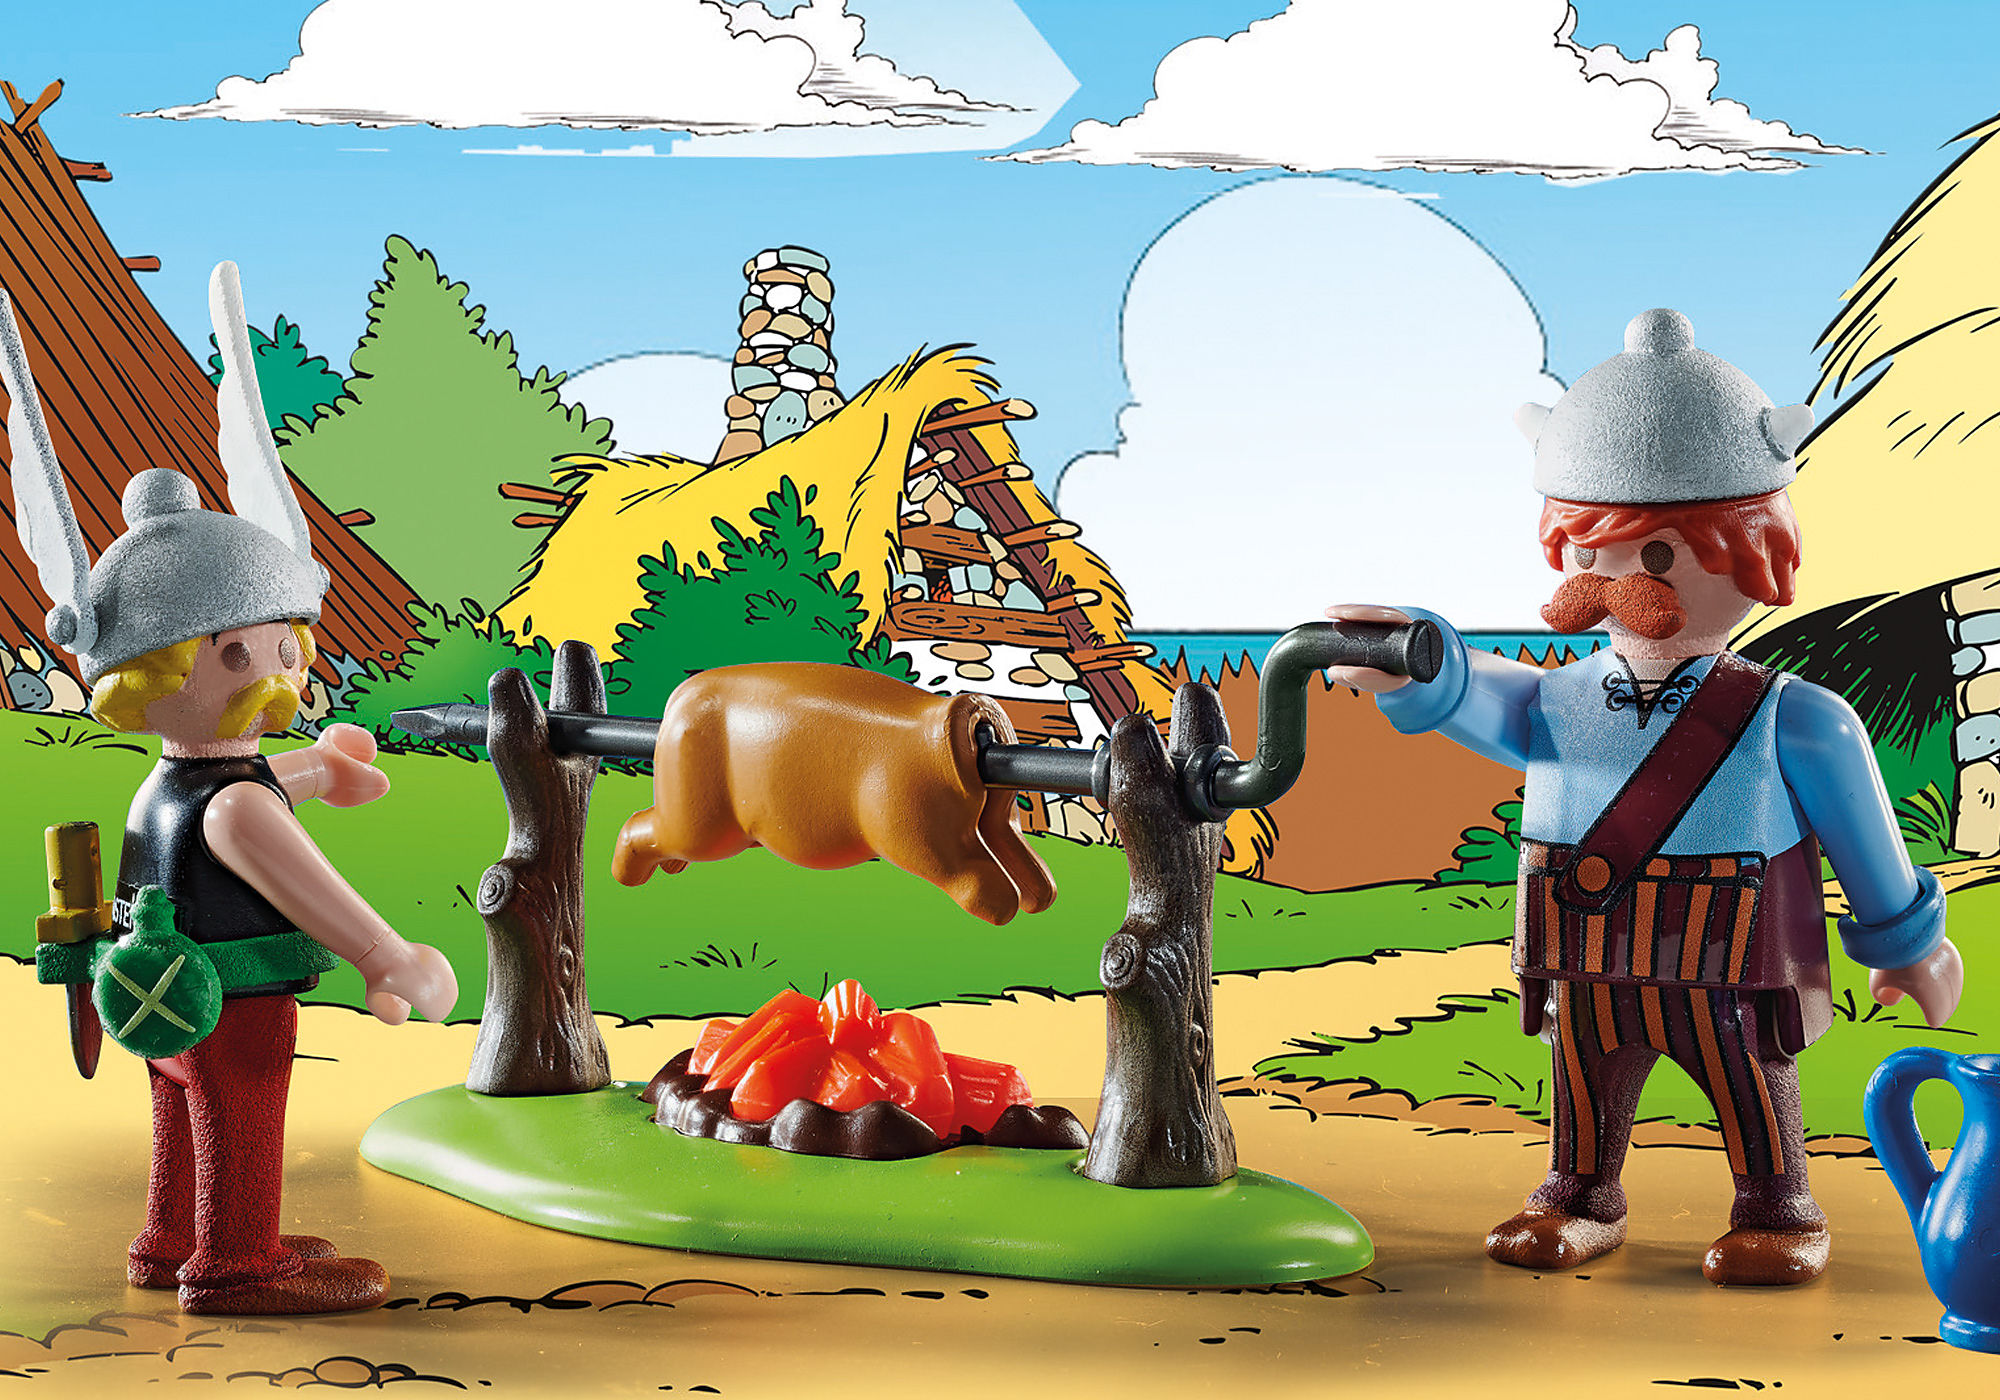 PLAYMOBIL ASTERIX 71087 70931 70932 70933 70934 71015 71016 71160ALL 8 BOXES